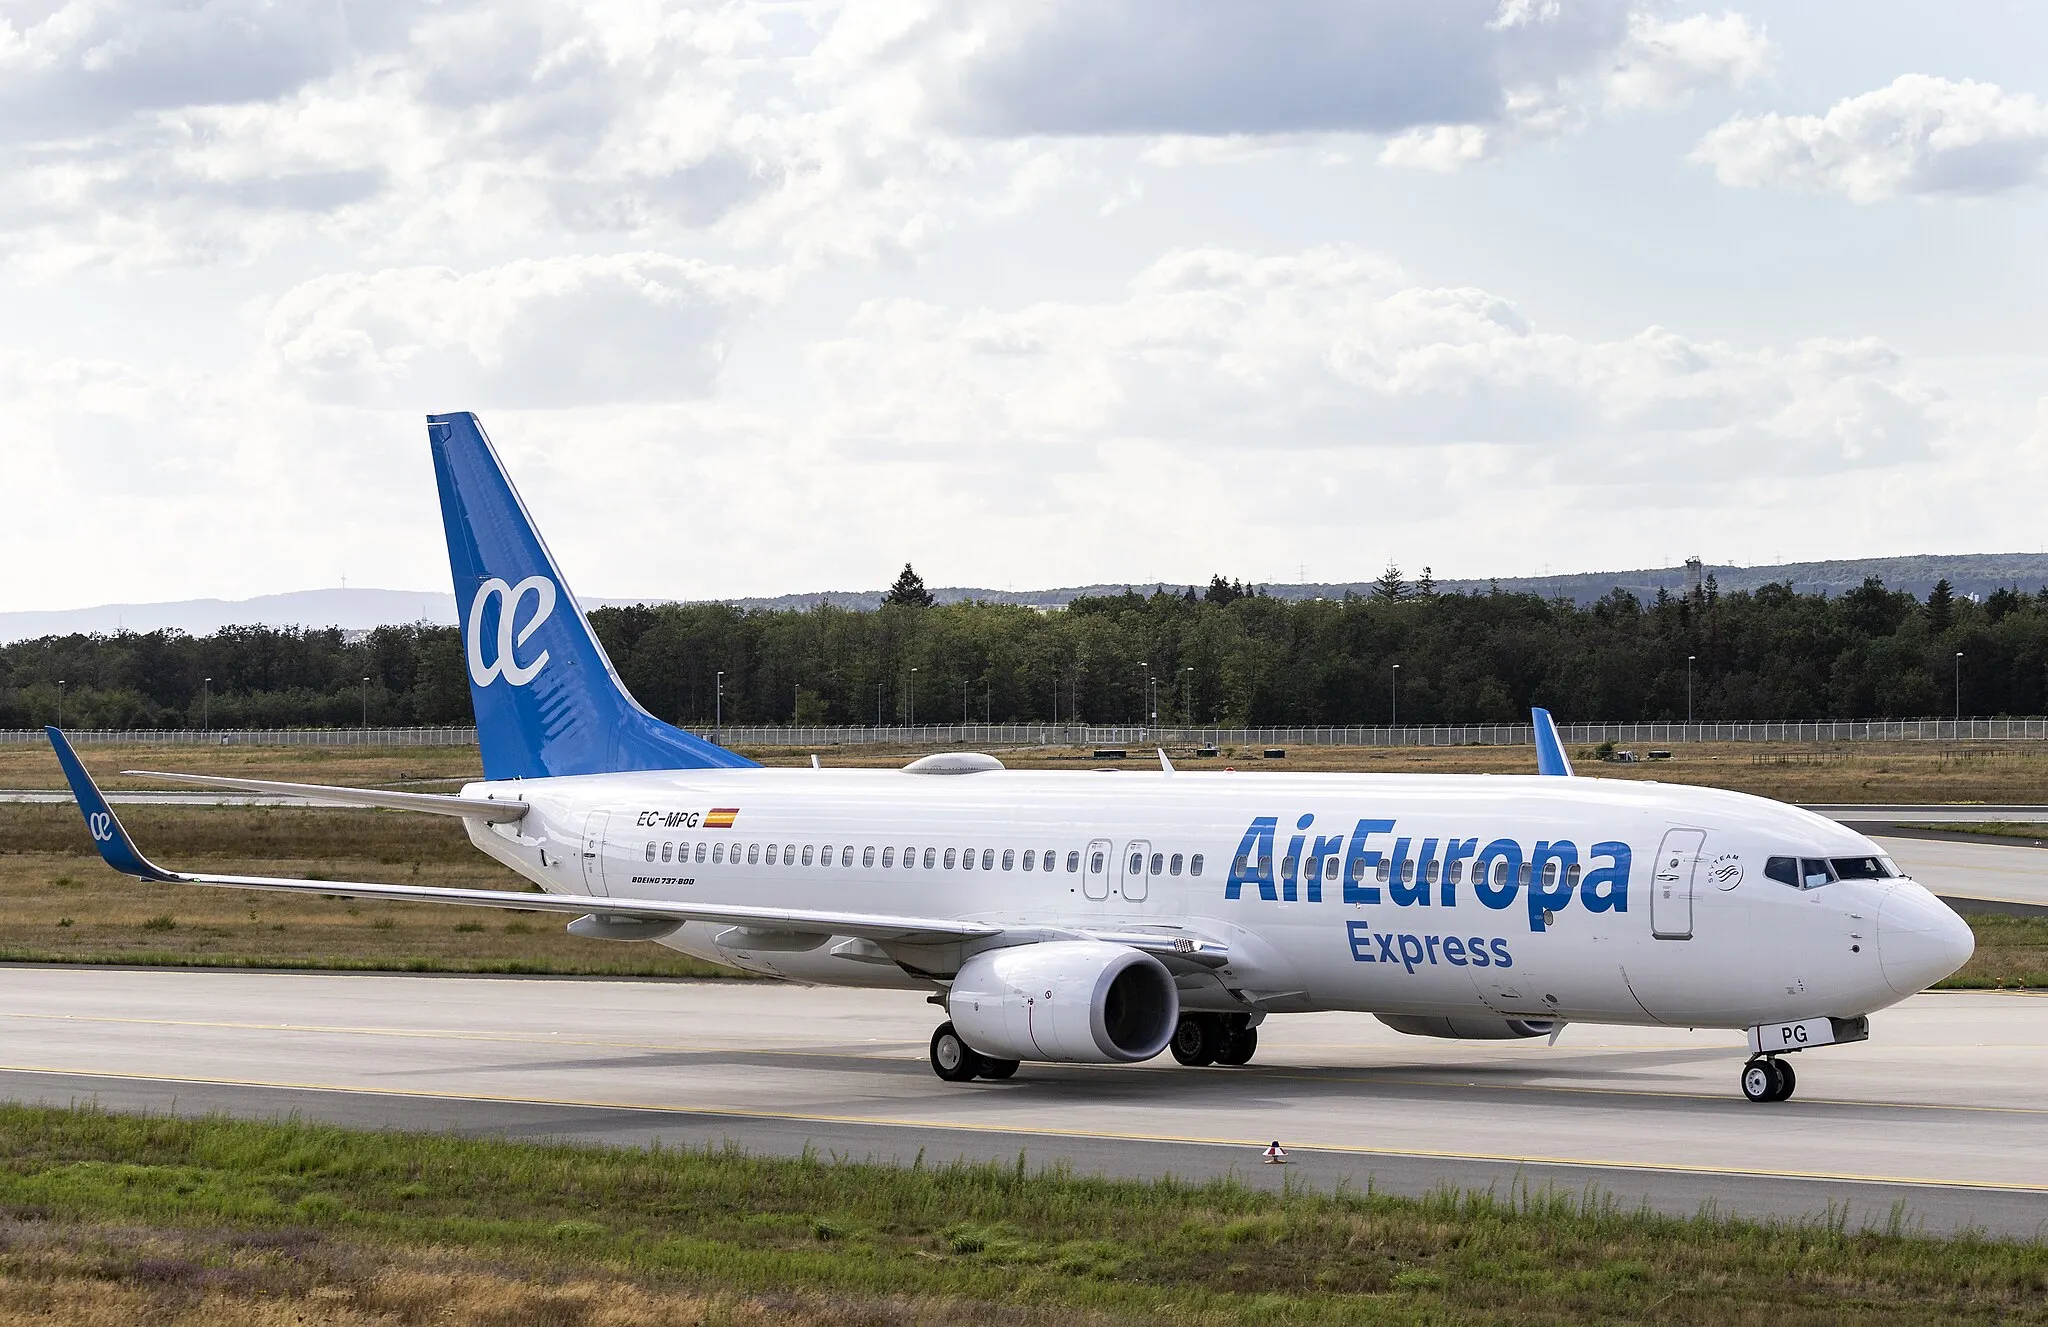 Photo showing: Frankfurt am Main Airport, Boeing 737-800 (EC-MPG) of AirEuropa Express taxiing to gate after landing on runway 25R.